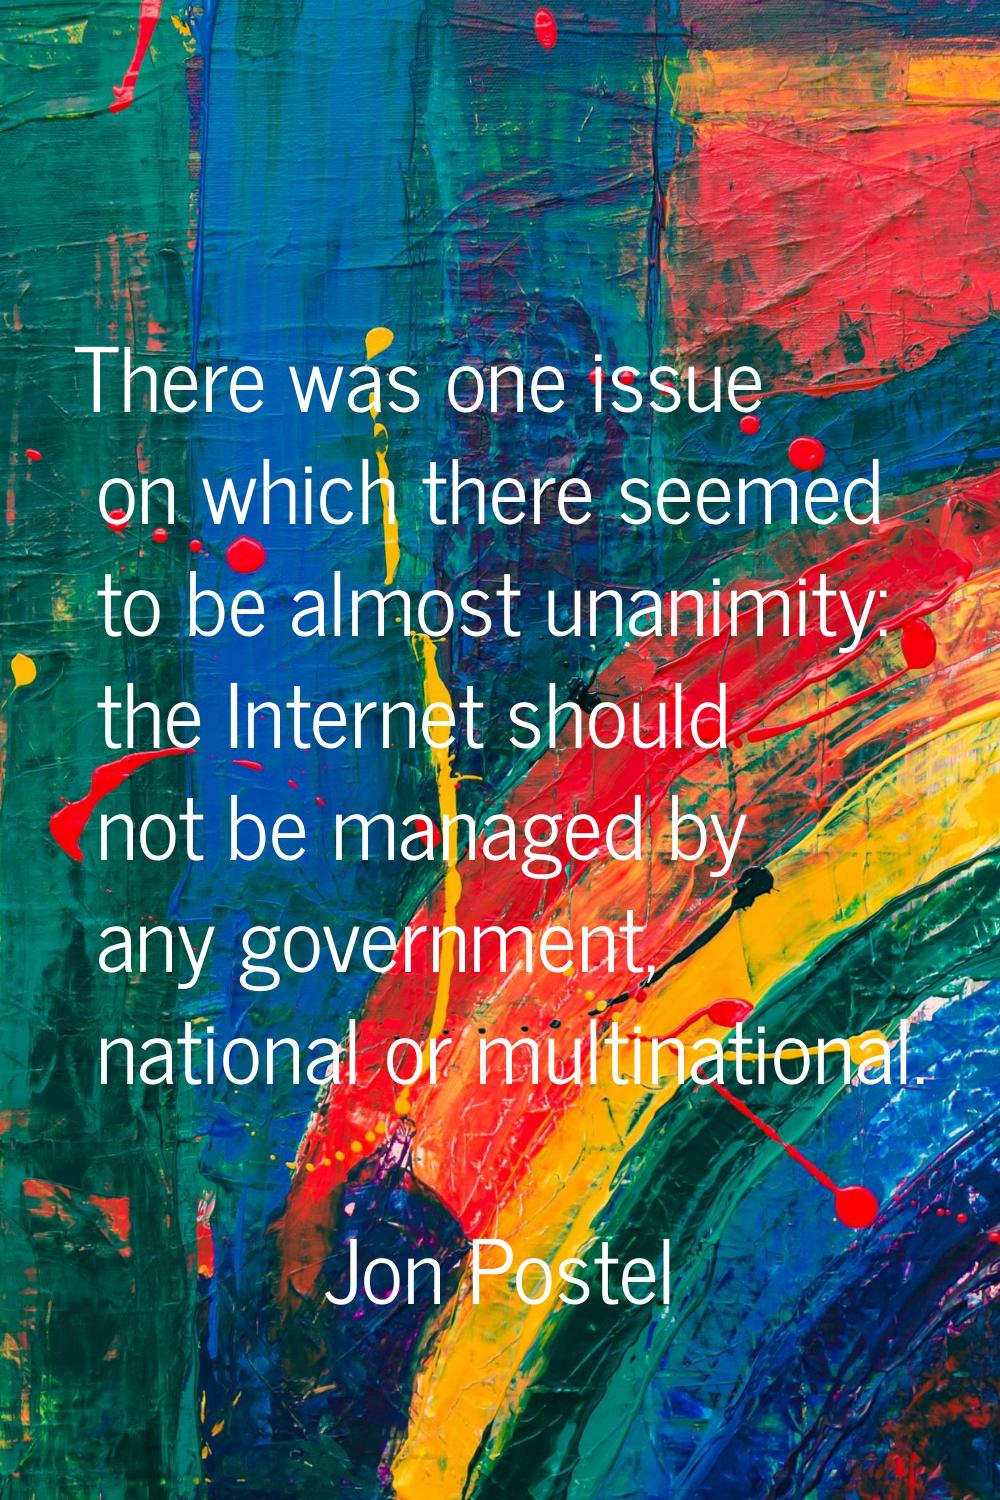 There was one issue on which there seemed to be almost unanimity: the Internet should not be manage